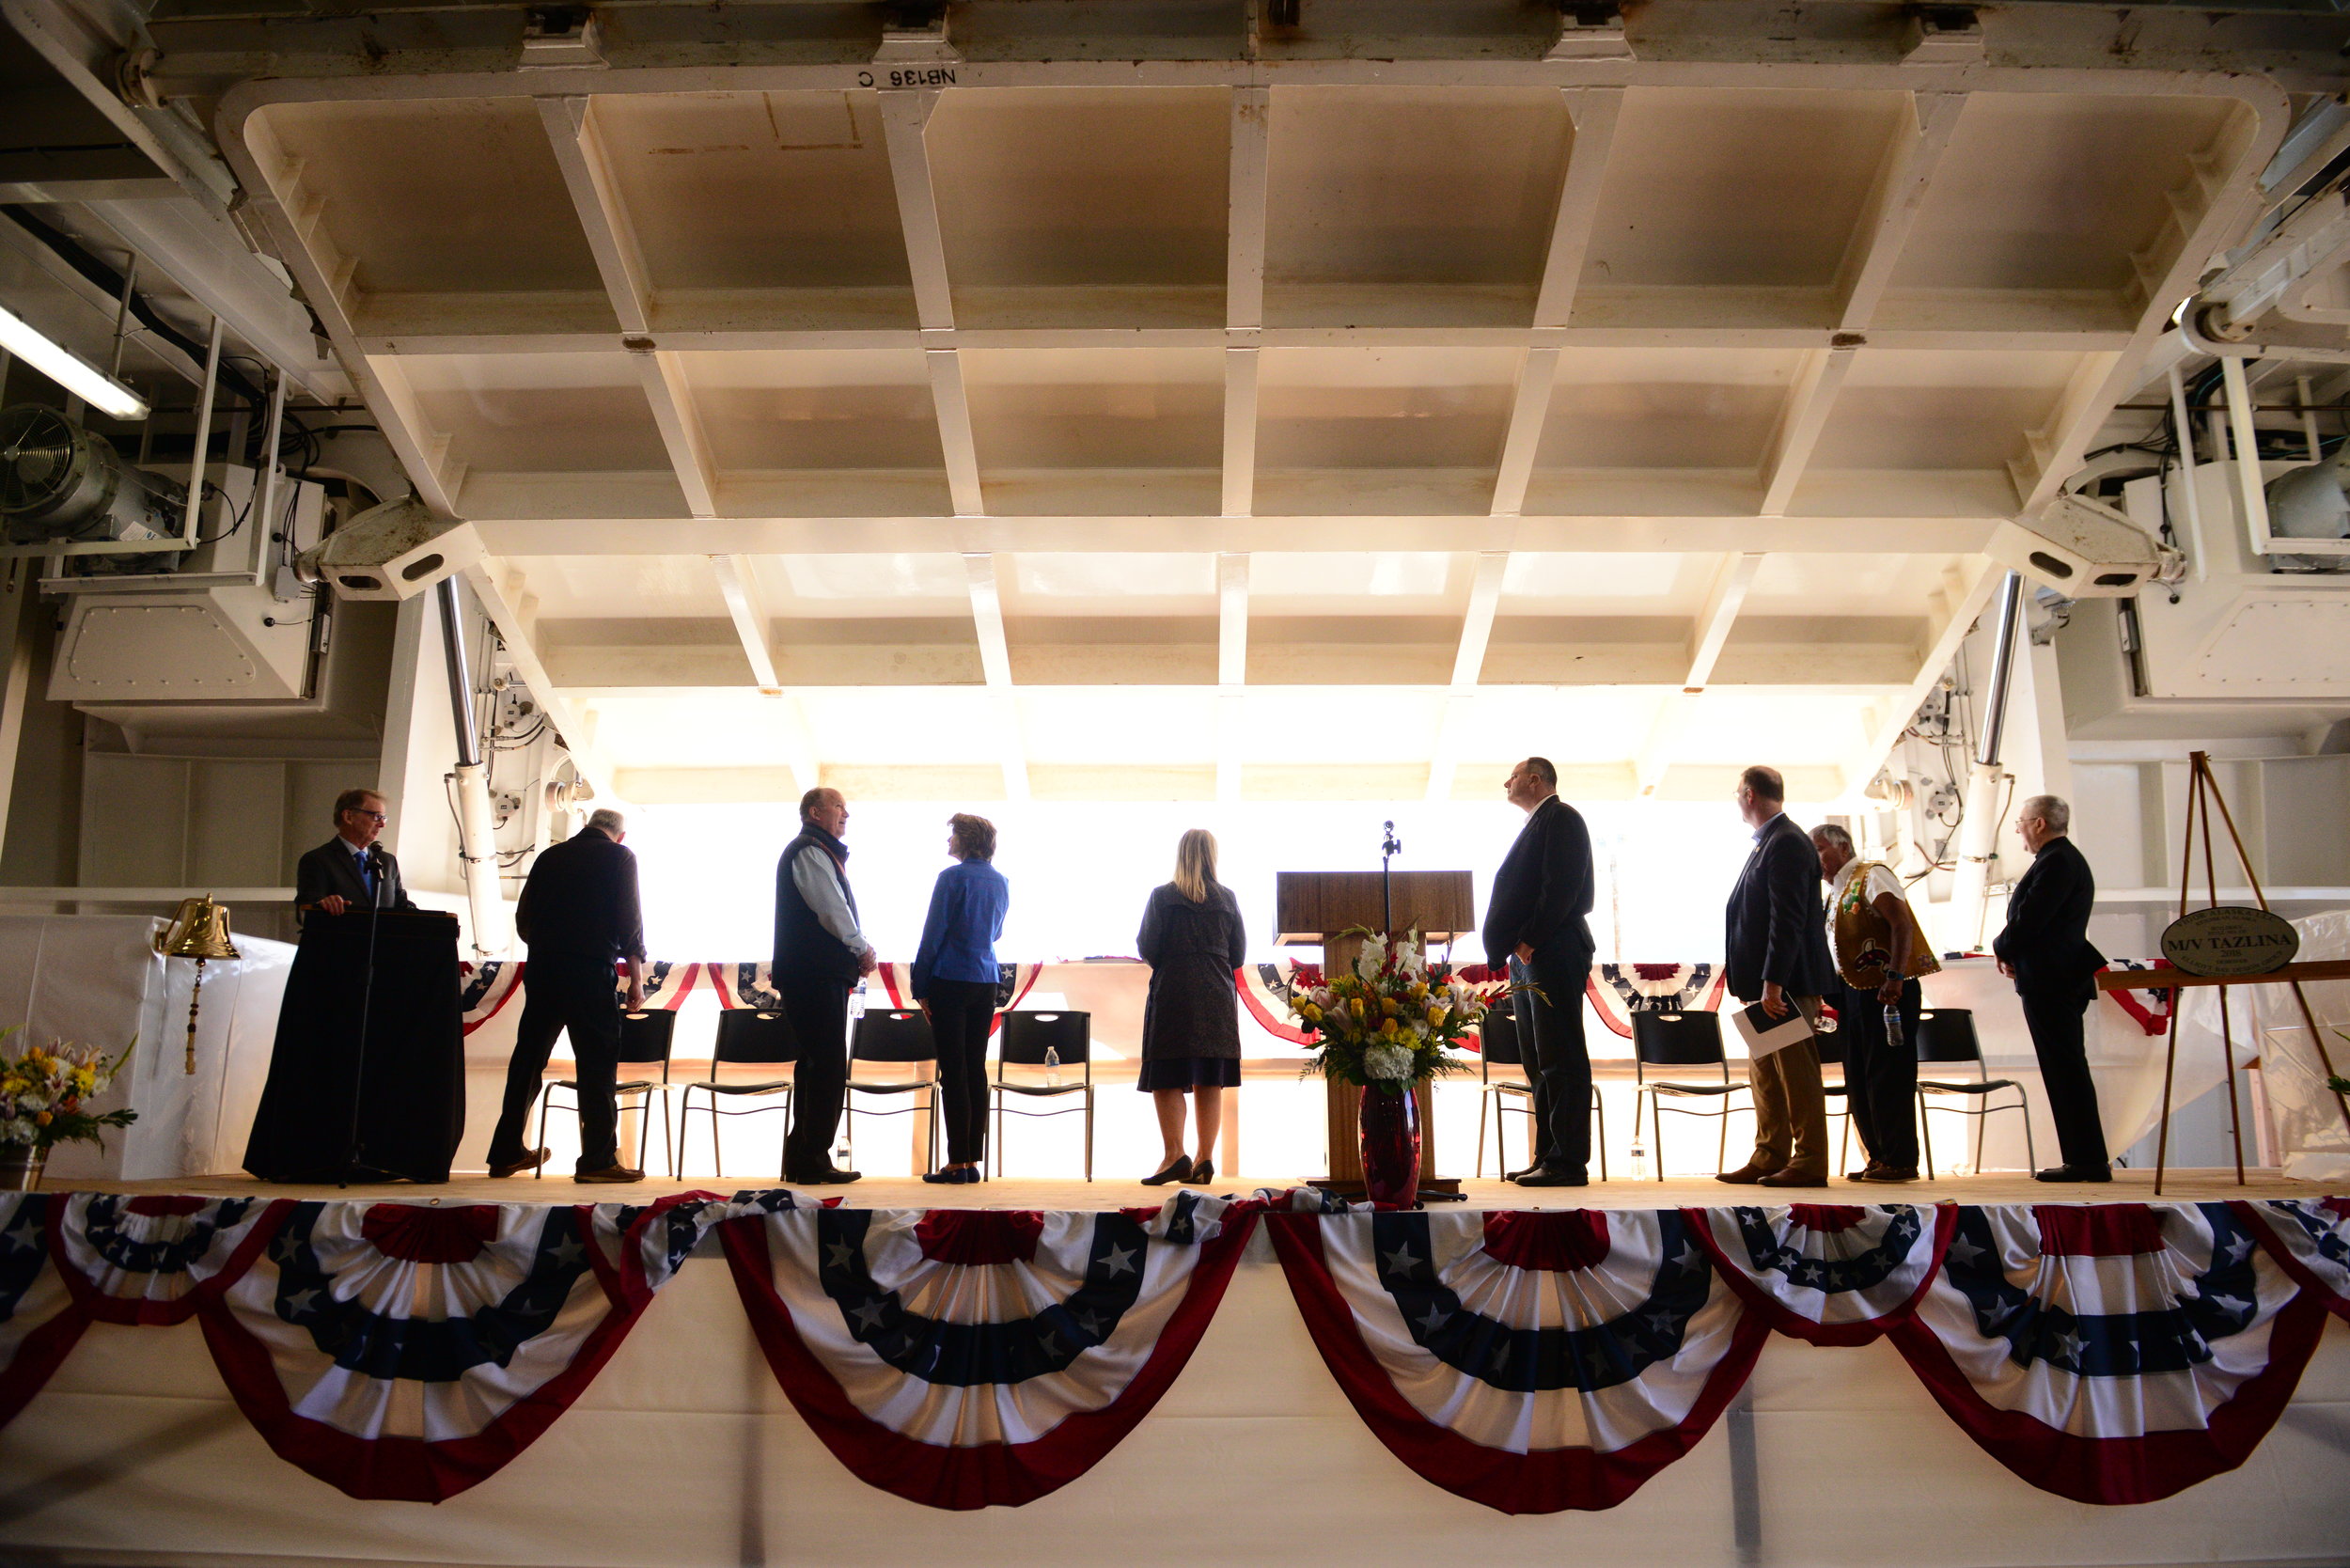  Representatives including Gov. Bill Walker, First Lady Donna Walker, Senator Bert Stedman, and Senator Lisa Murkowski are silhouetted as the rear loading dock of the Alaska Marine Highway’s newest vessel, the M/V Tazlina, is opened to the sun during